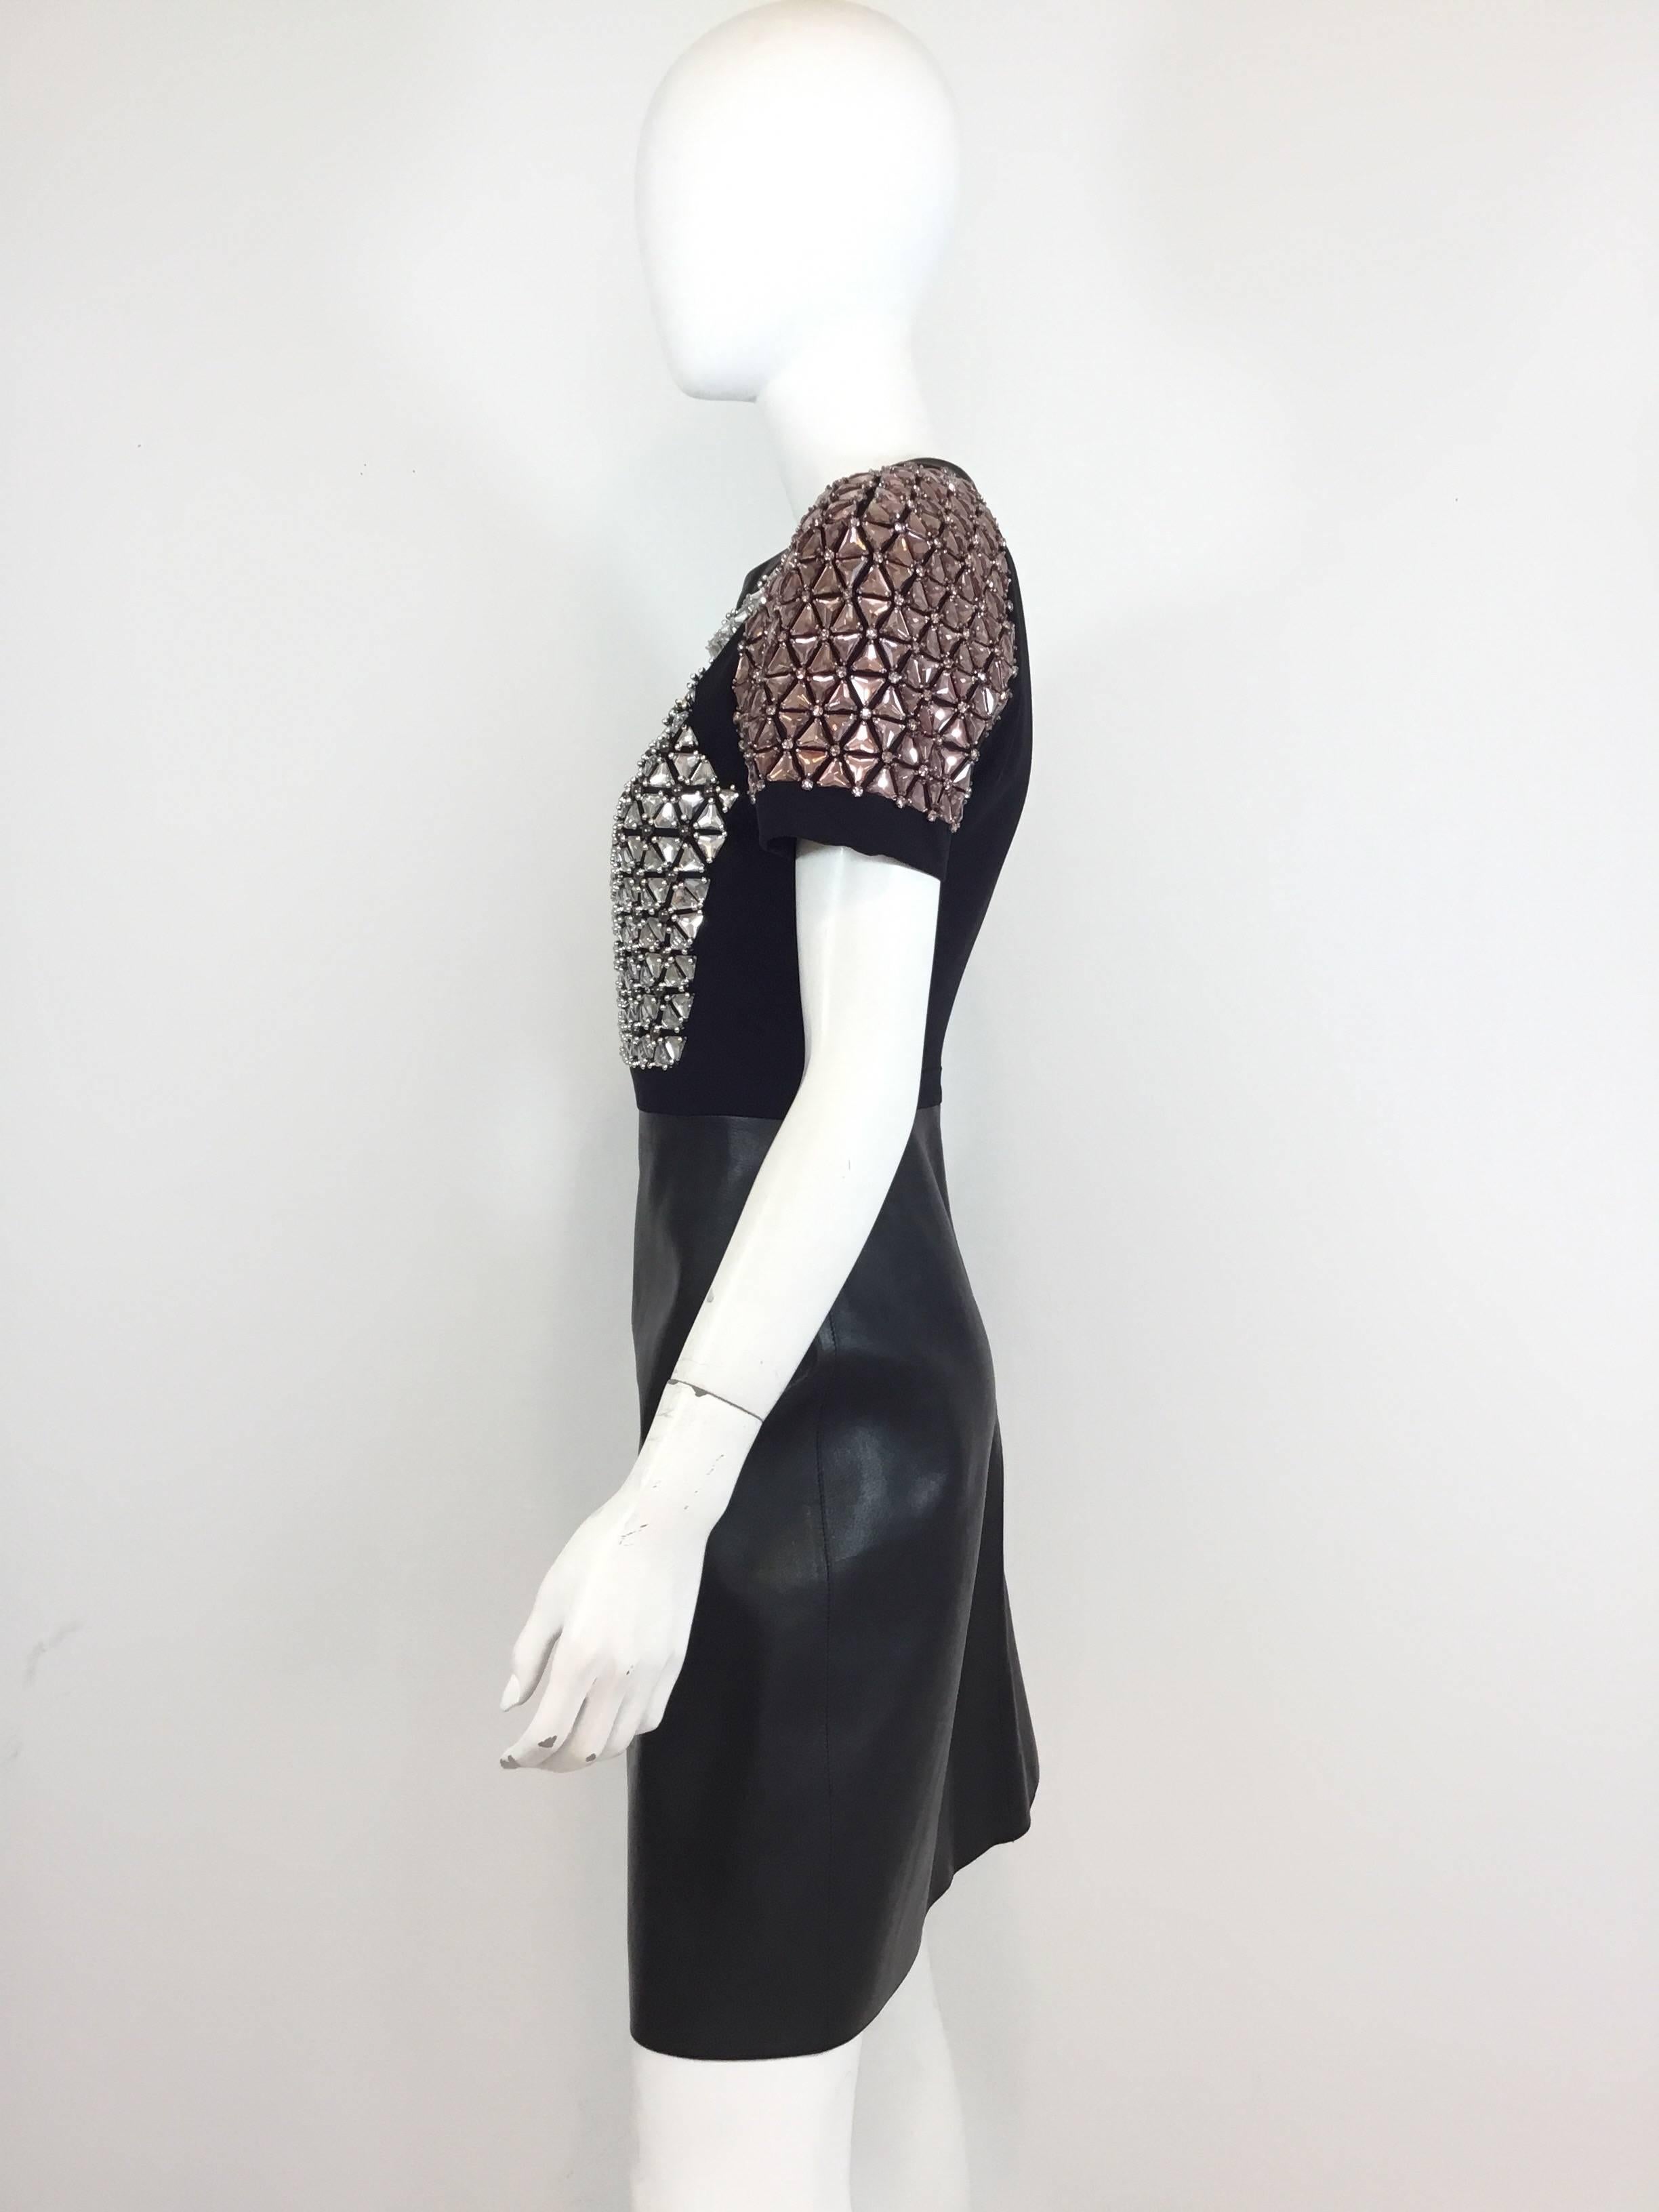 Women's Gucci Couture Embellished Leather Dress, Winter 2014 - 5